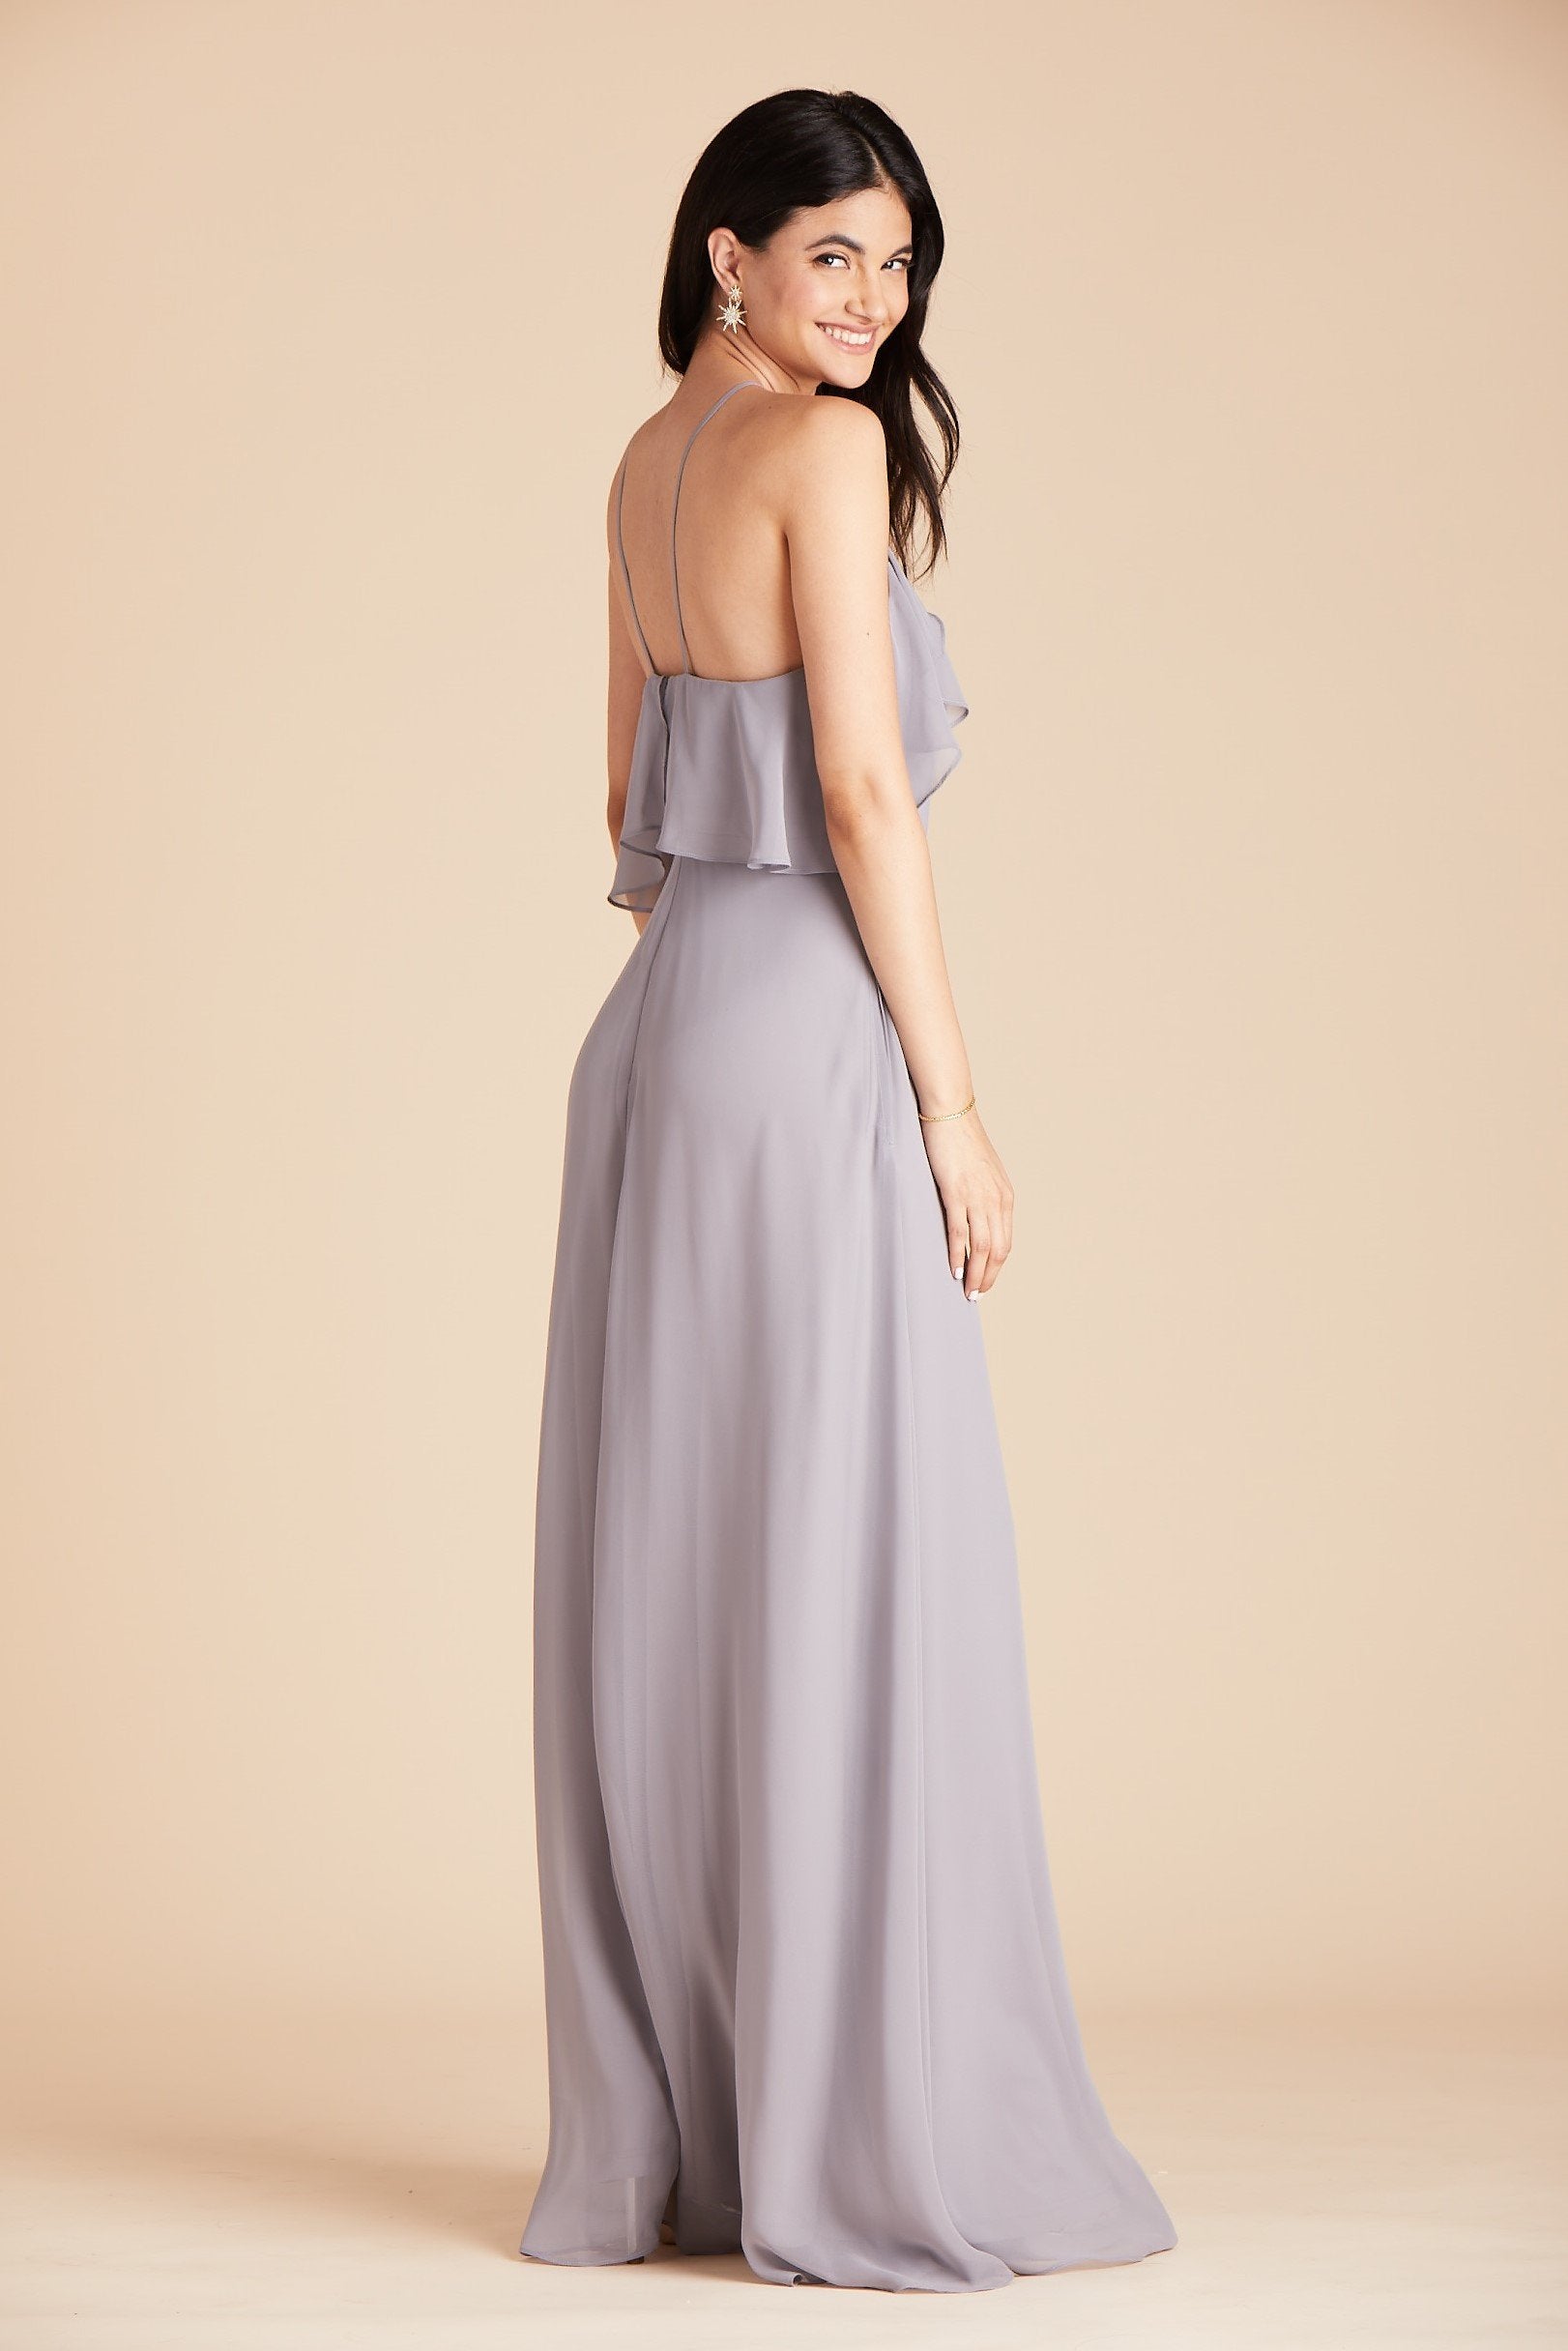 Jules bridesmaid dress in silver chiffon by Birdy Grey, side view